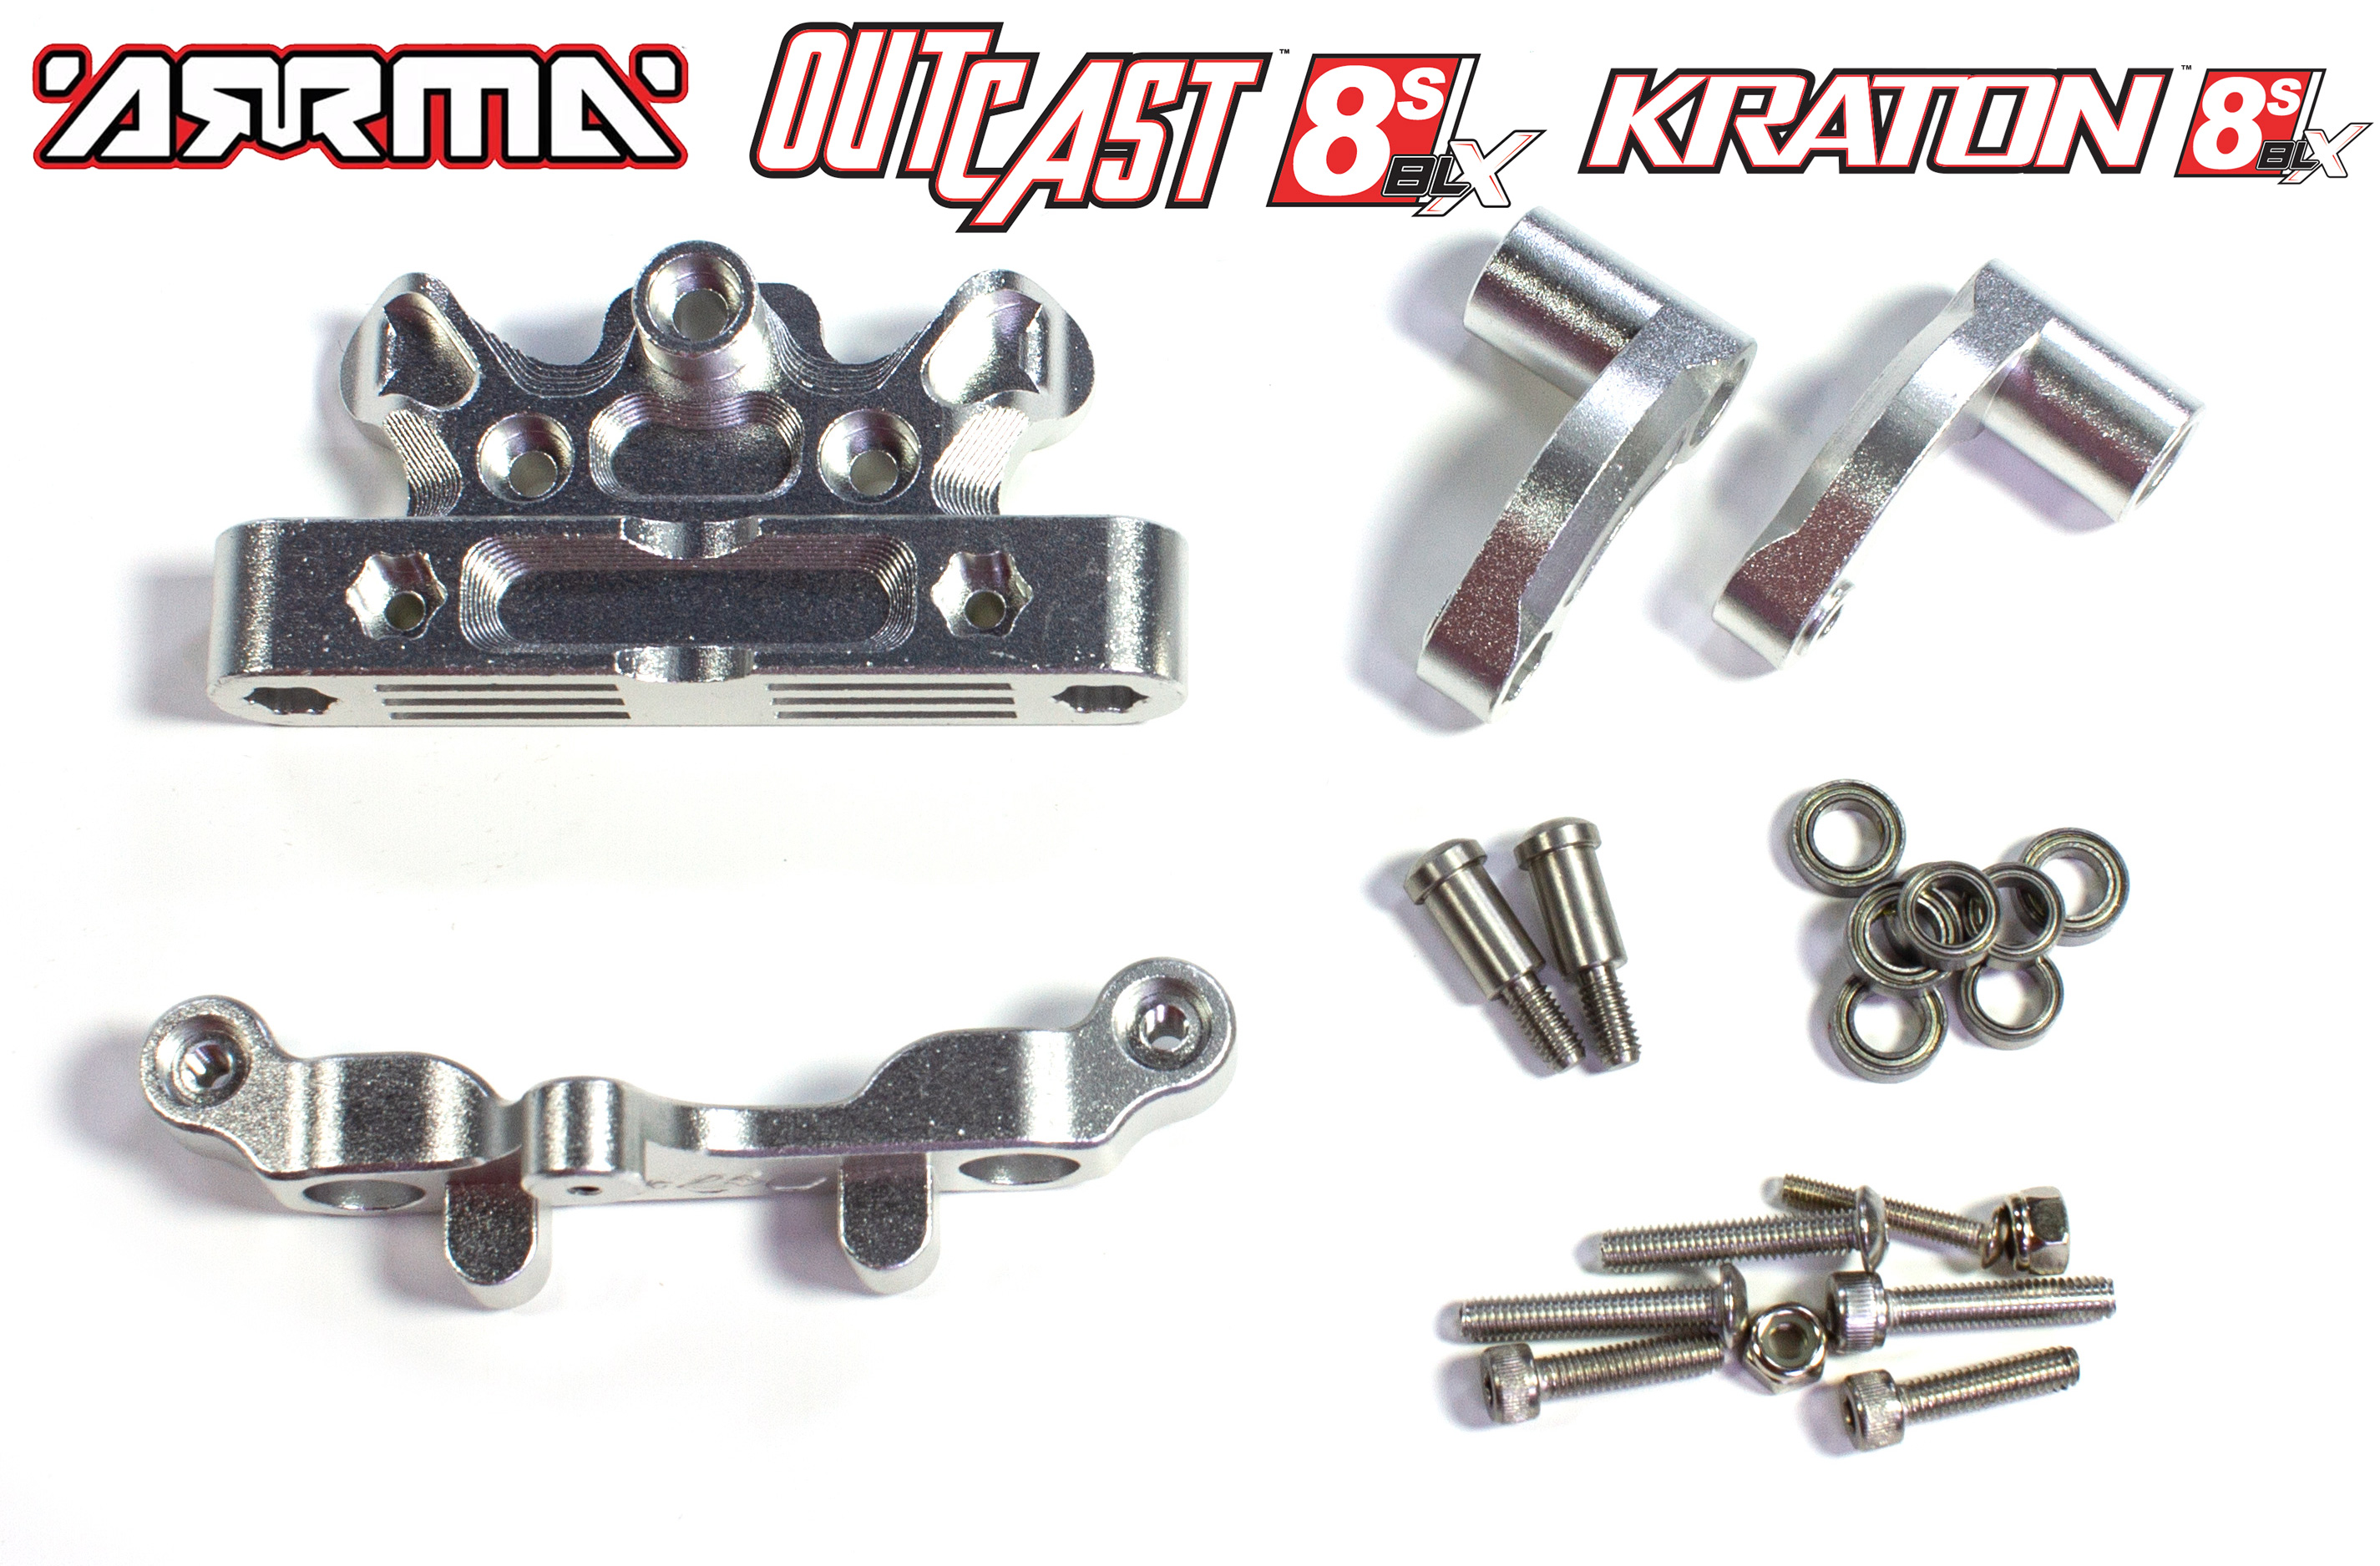 AKX048 GPM steering assembly for Arrma Kraton / Outcast 8S